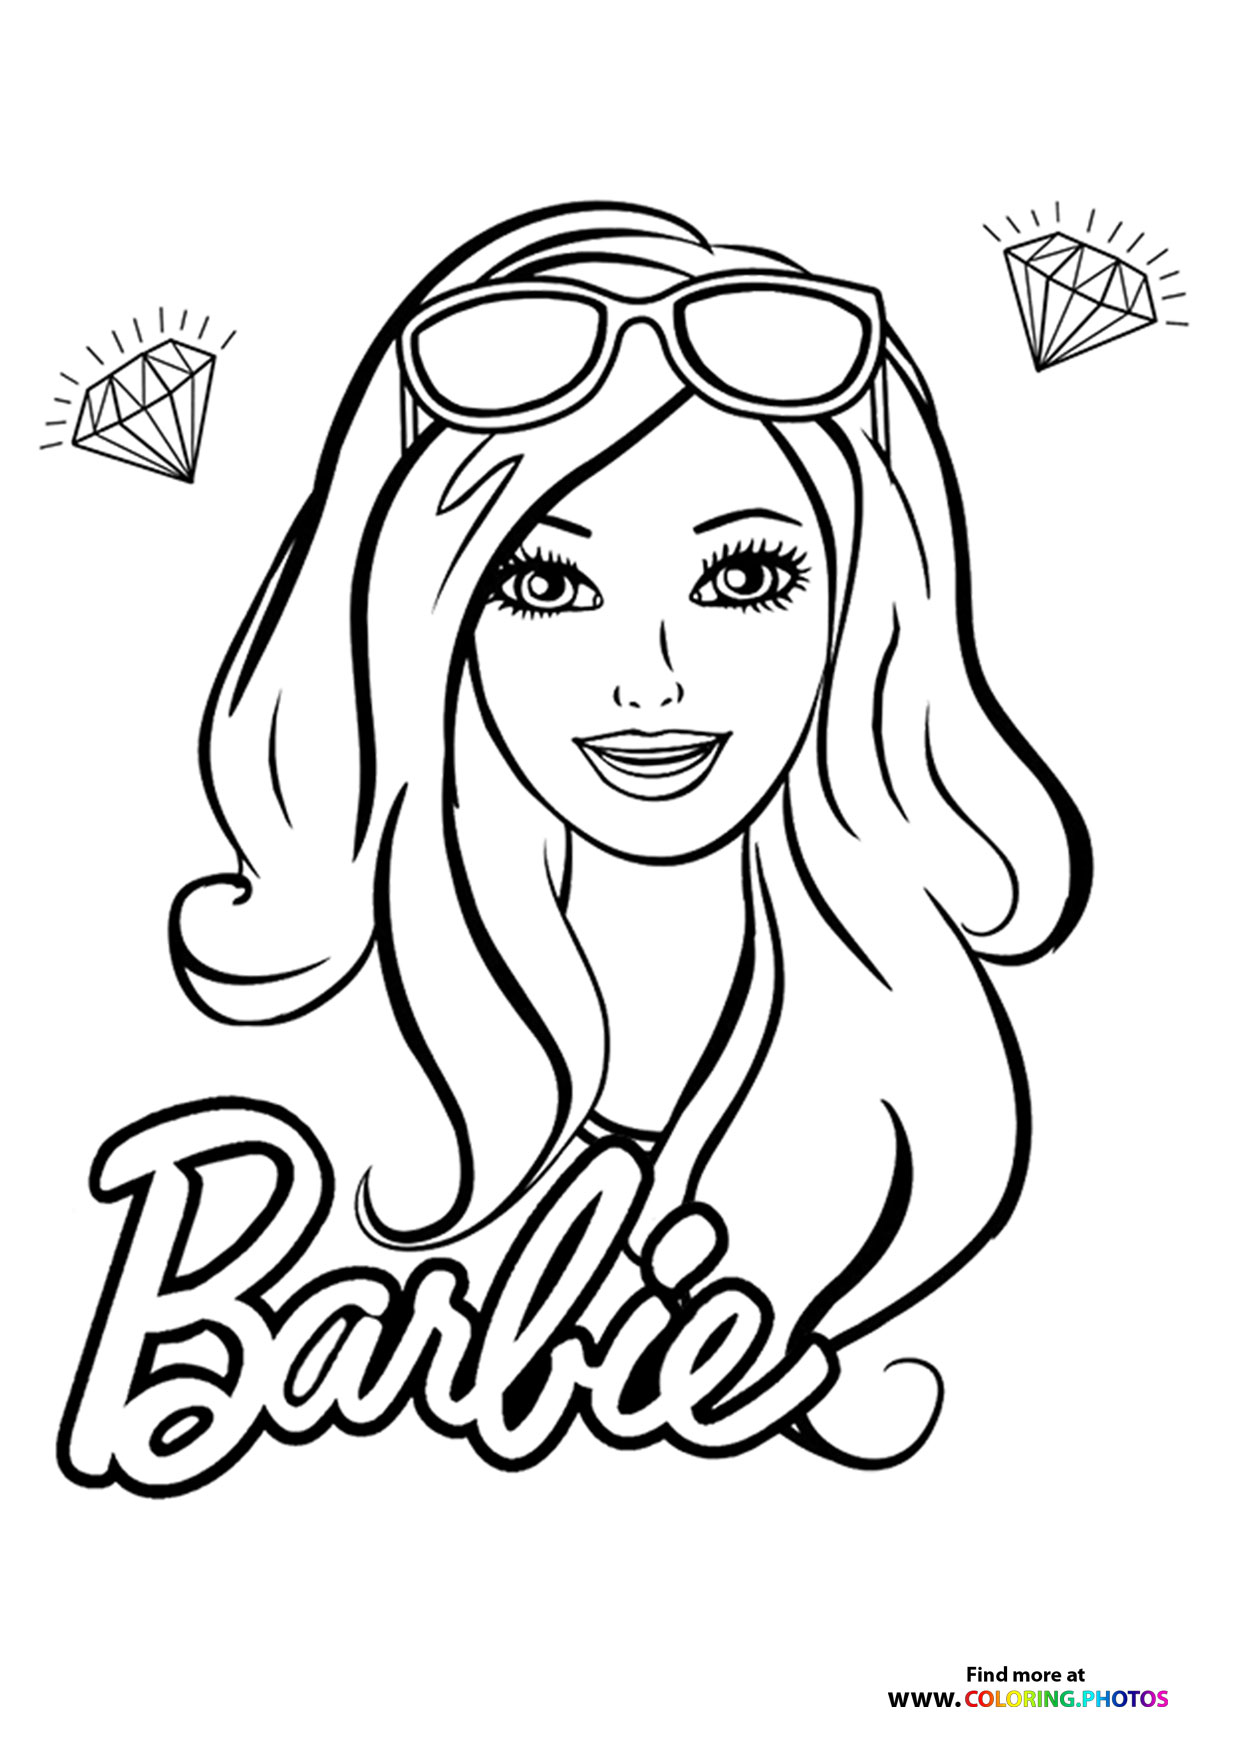 Printable Barbie and Cat Coloring Pages  Barbie coloring pages, Barbie  coloring, Cat coloring page